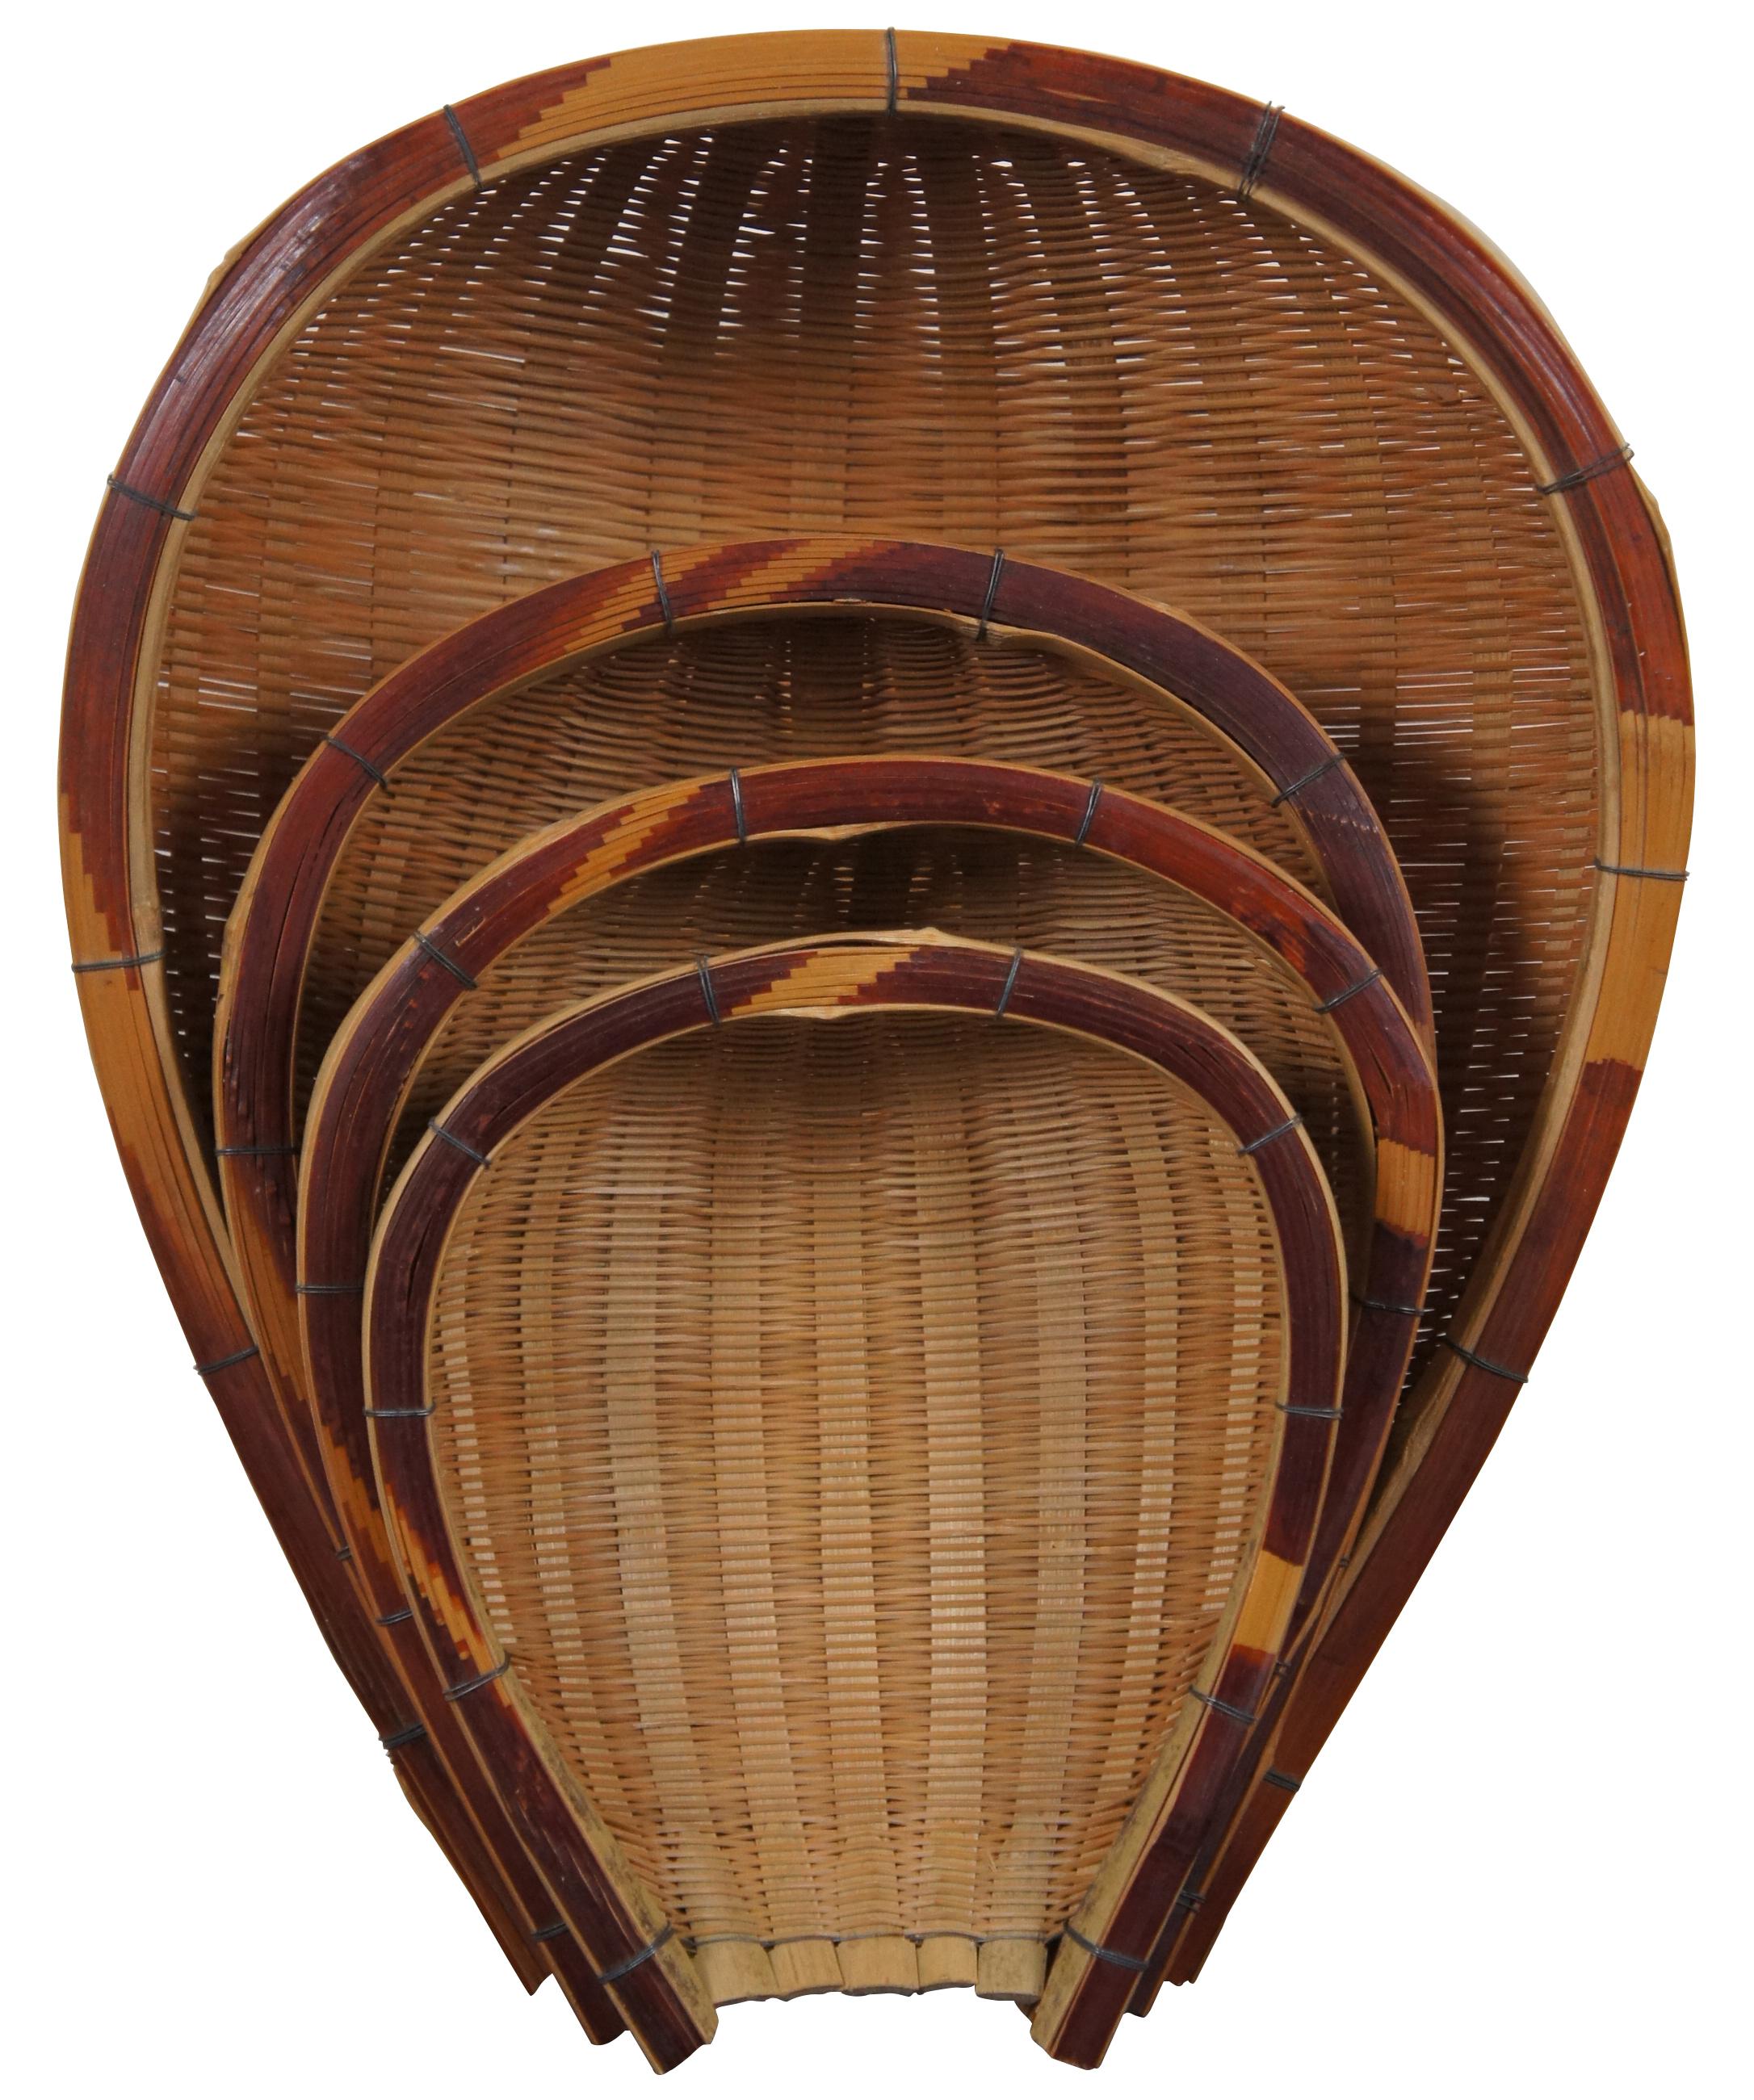 Set of four hand woven nesting baskets in the shape of dust pan, fruit bowl or shovel.

Measures: Largest - 16” x 13” x 4.75” / Smallest - 8.75” x 7.5” x 2.75” (Length x Width x Depth).
 